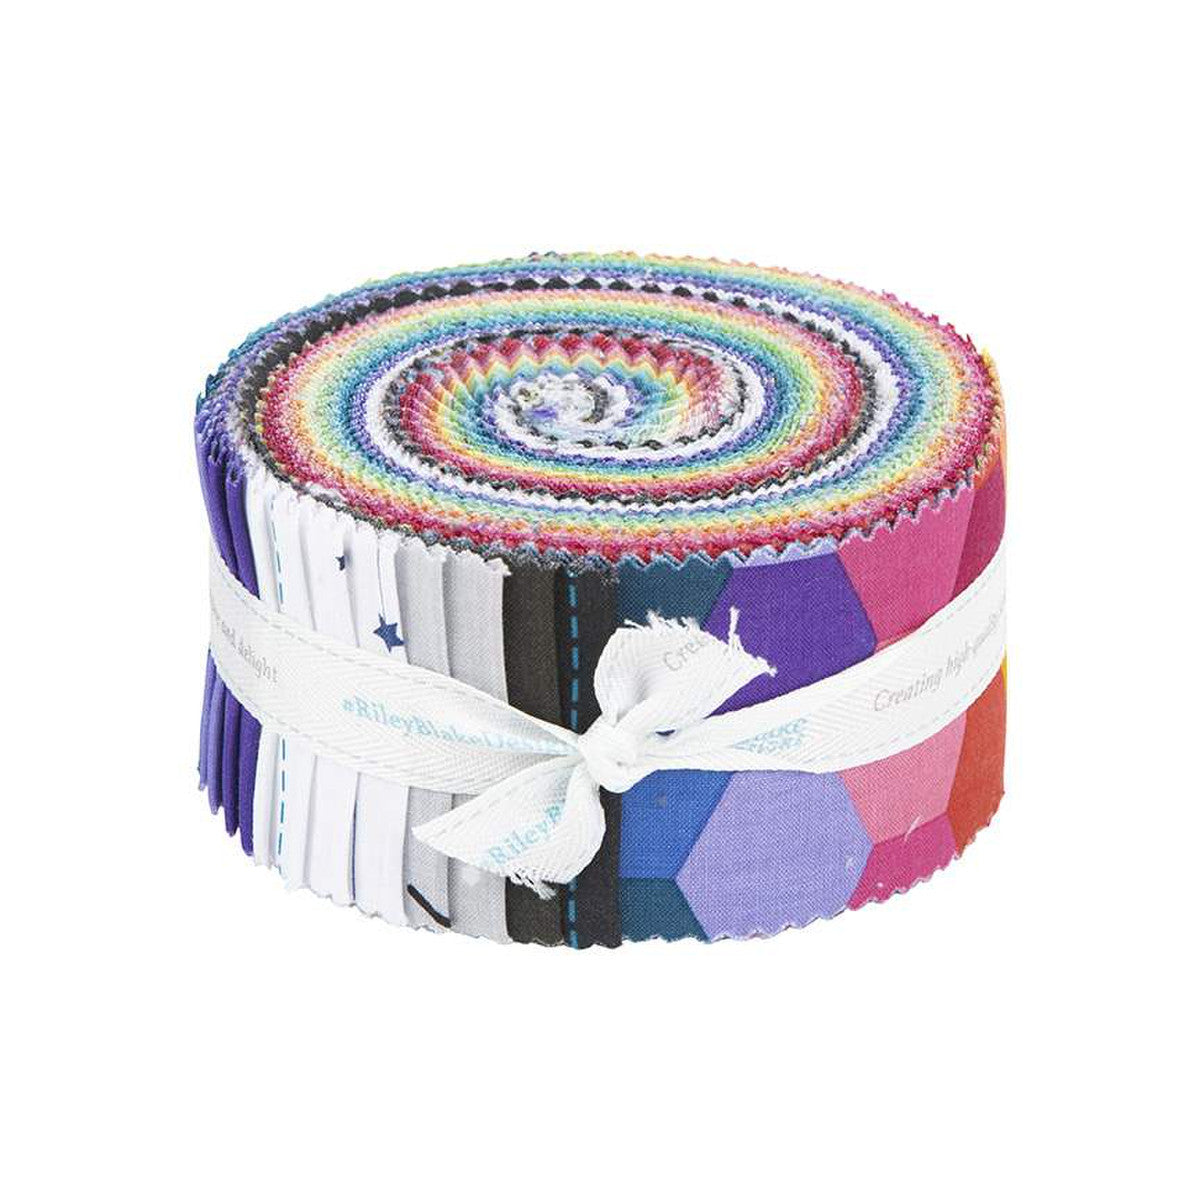 Tula Pink - Pinkerville - Jelly Roll - 884424256782